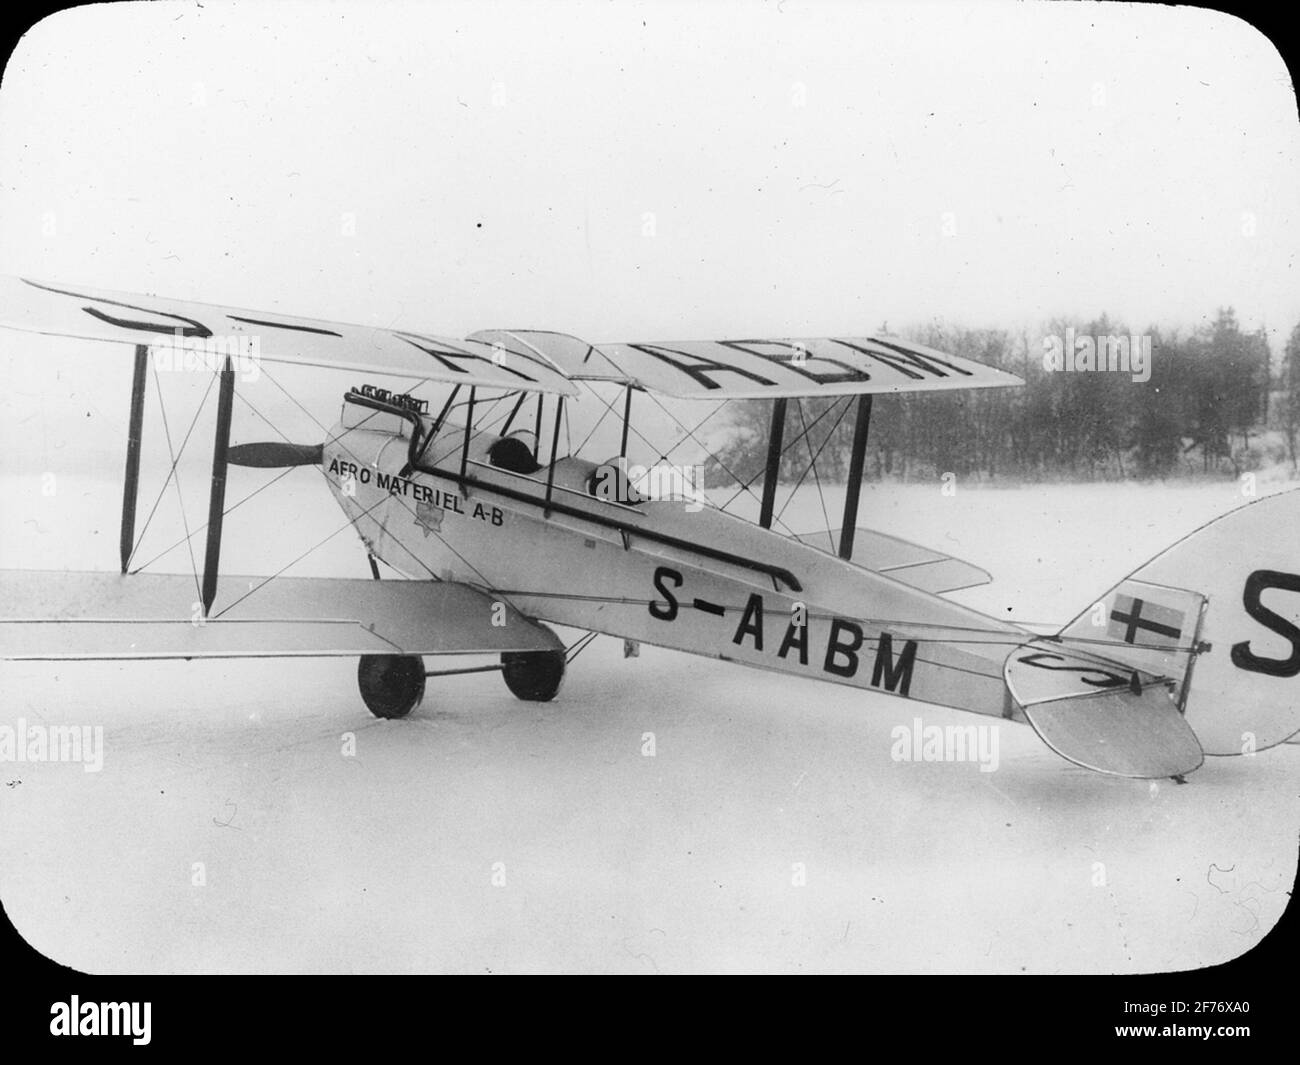 Skiopticone image with motifs of aircraft, Aeromateriel AB S-AABM. Stock Photo